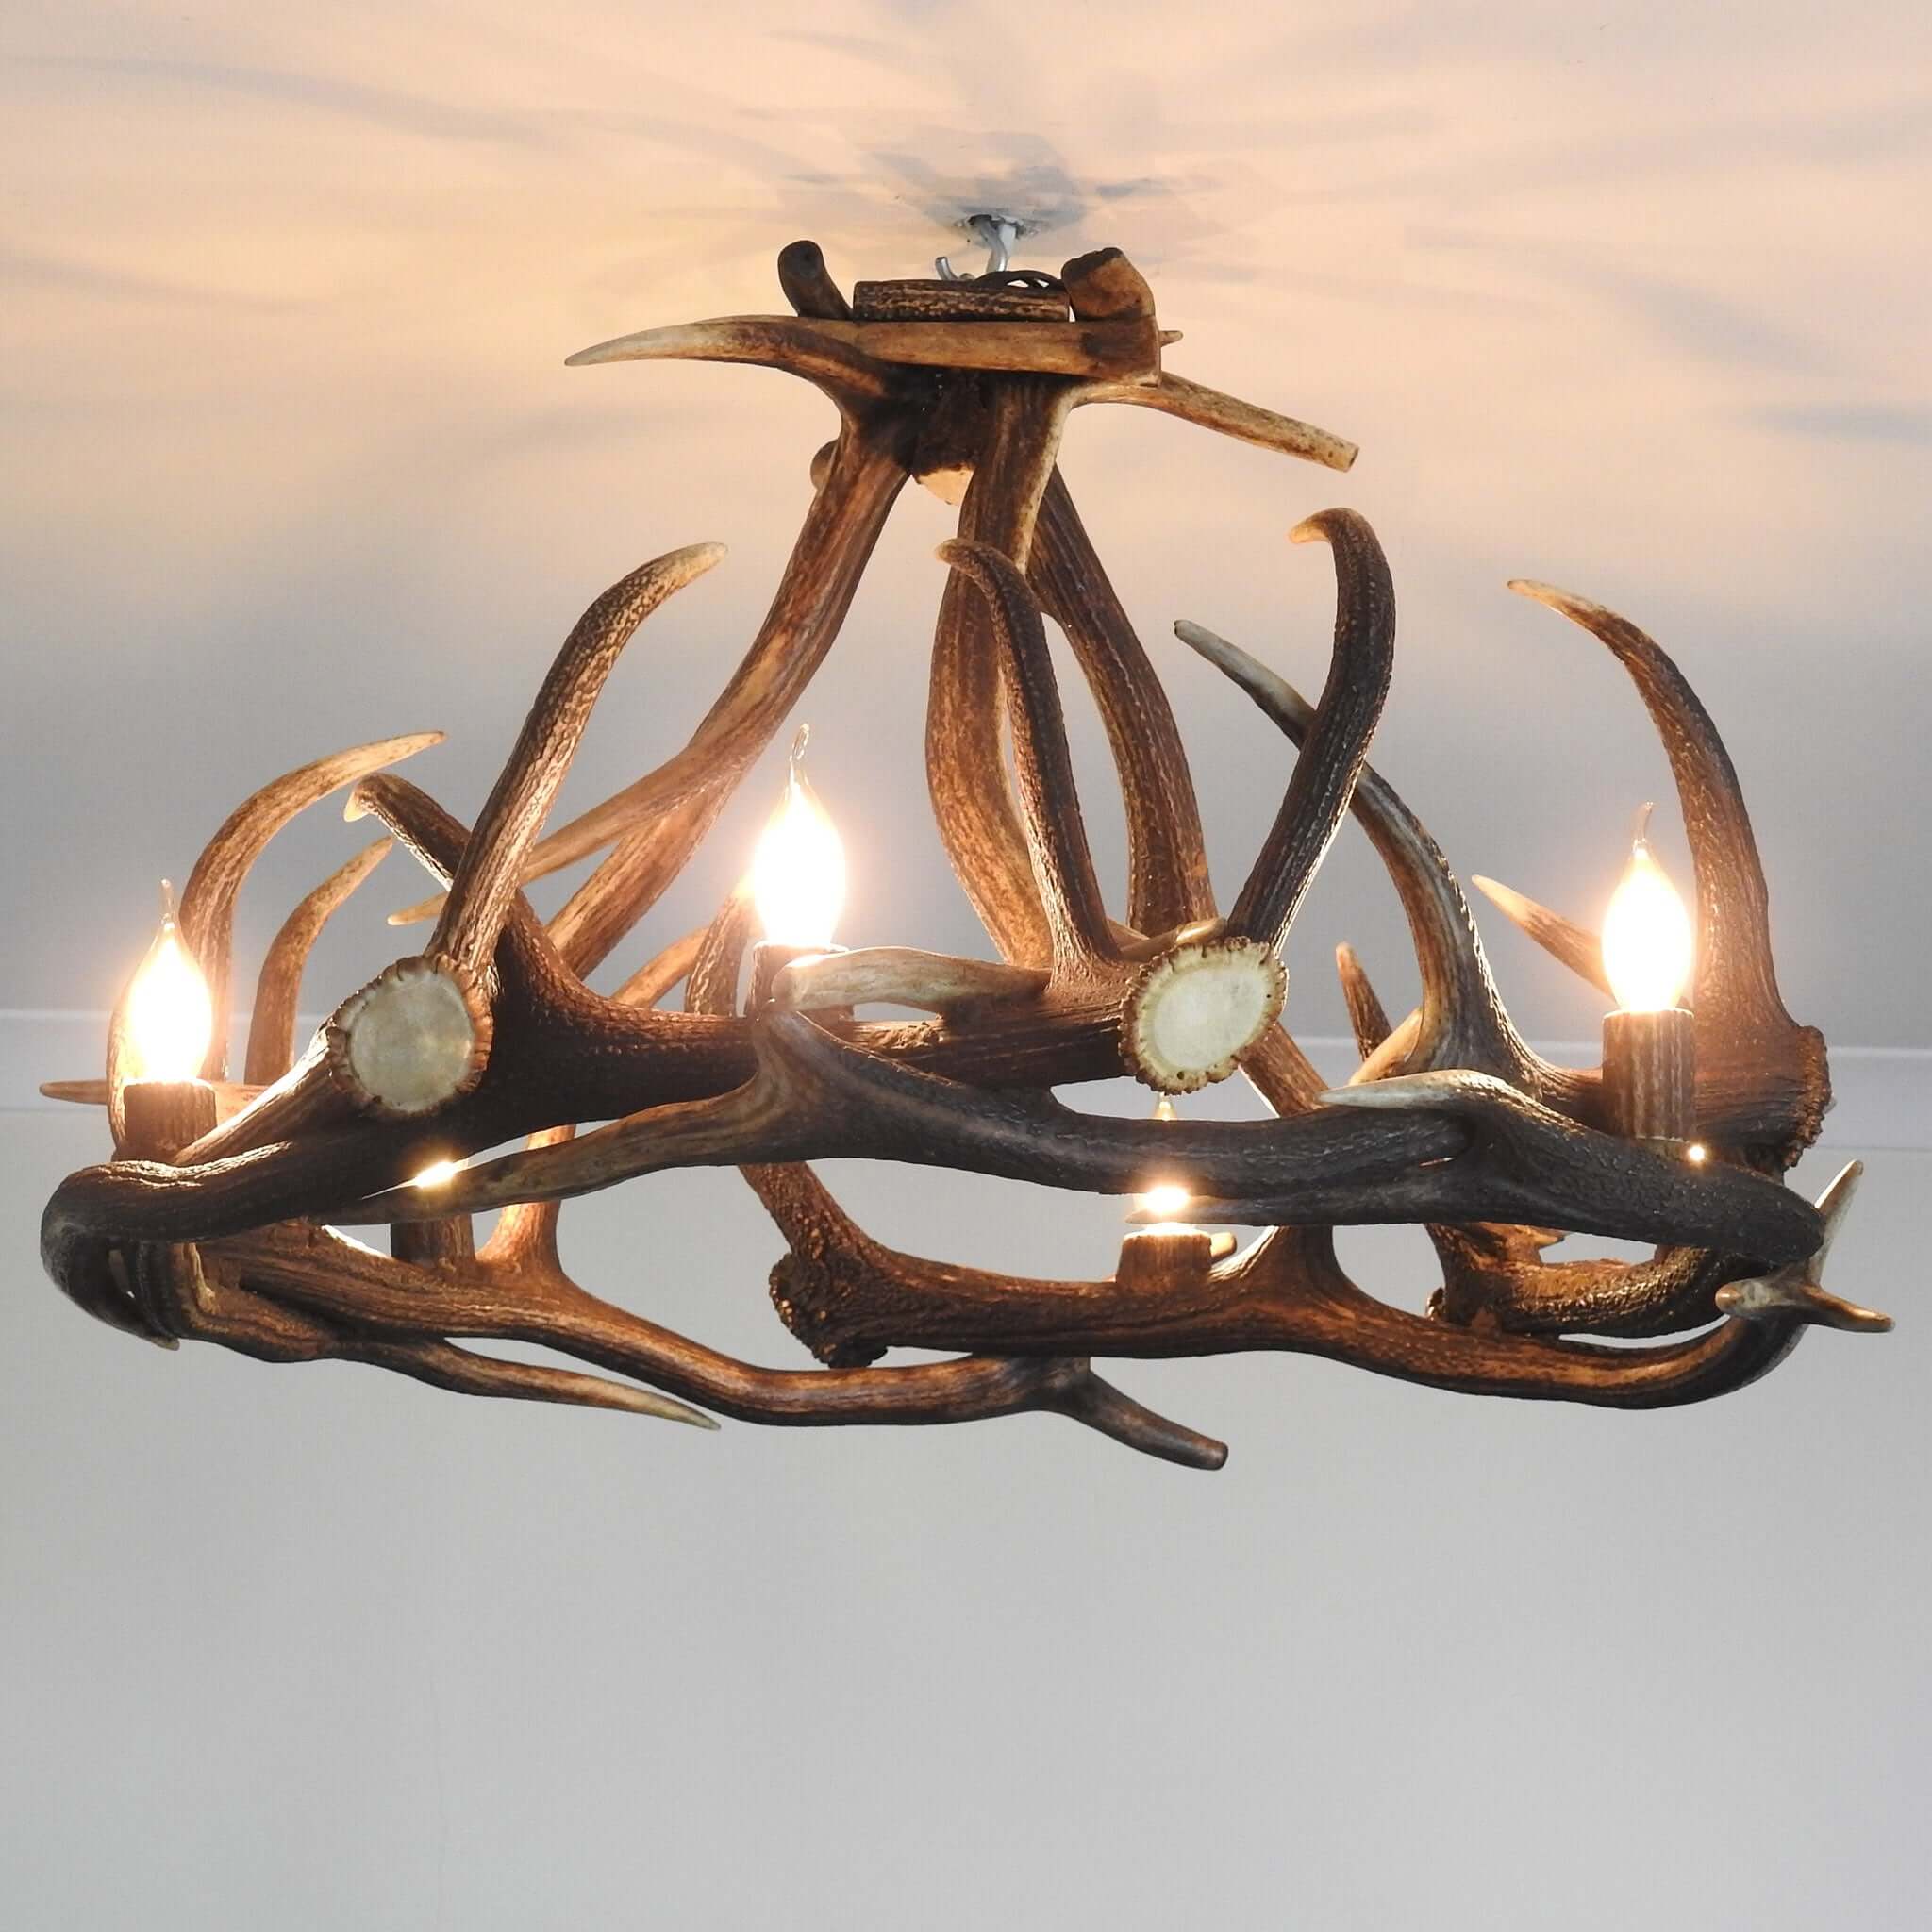 Real rustic style antler chandelier for 6 bulbs.